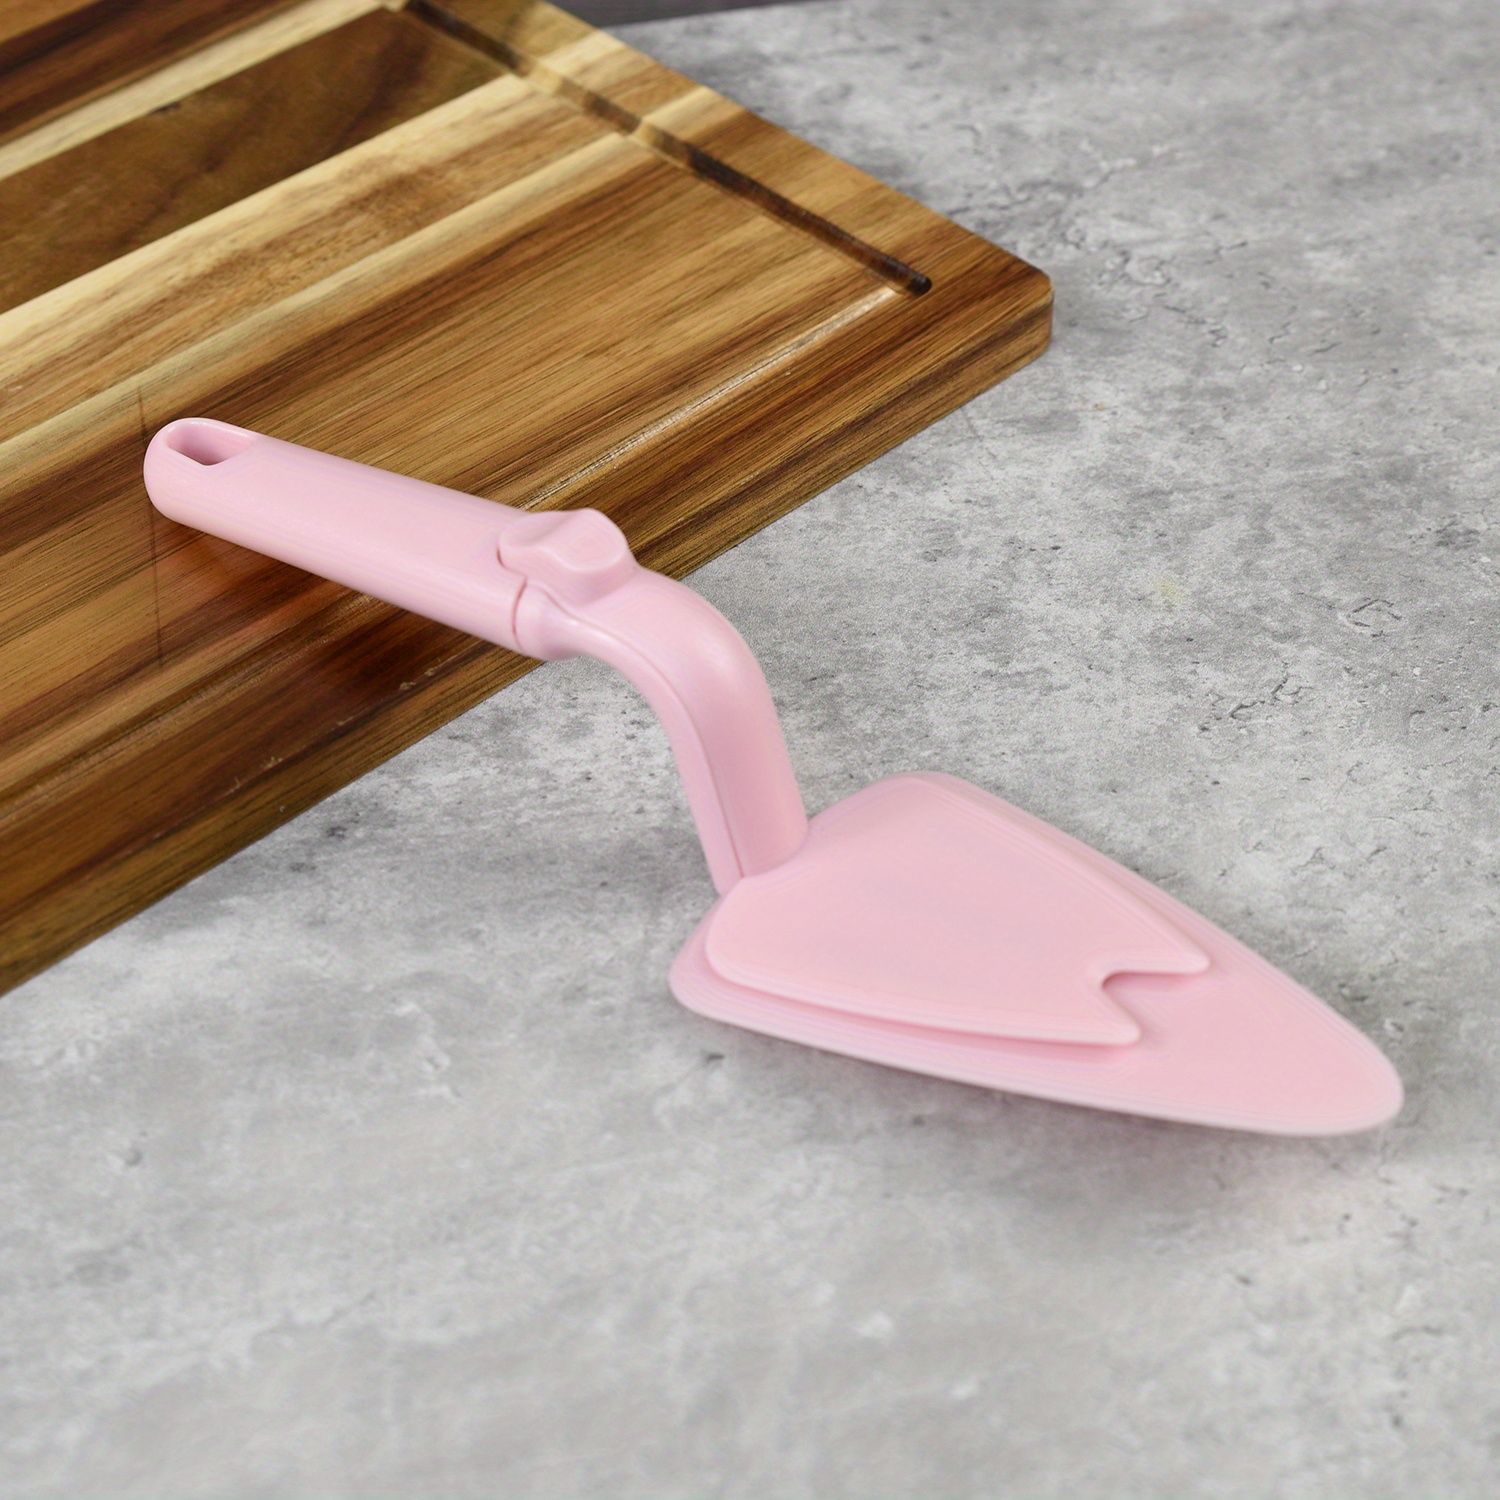 Cake And Pie Shovel, Essential Baking Cooking Tool, Great For